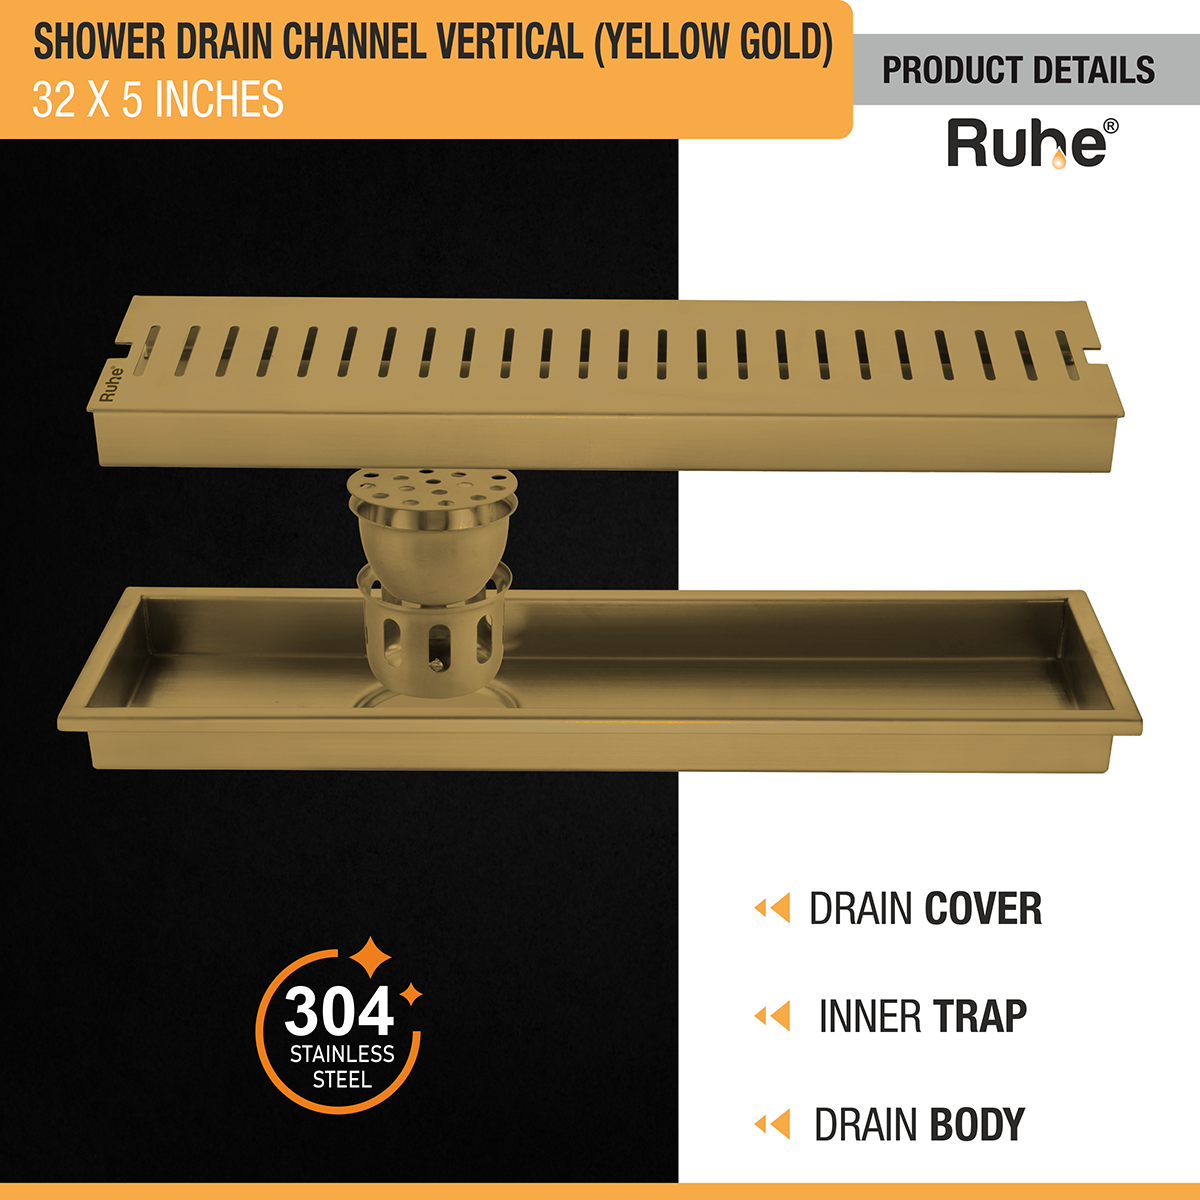 Vertical Shower Drain Channel (32 x 5 Inches) YELLOW GOLD product details